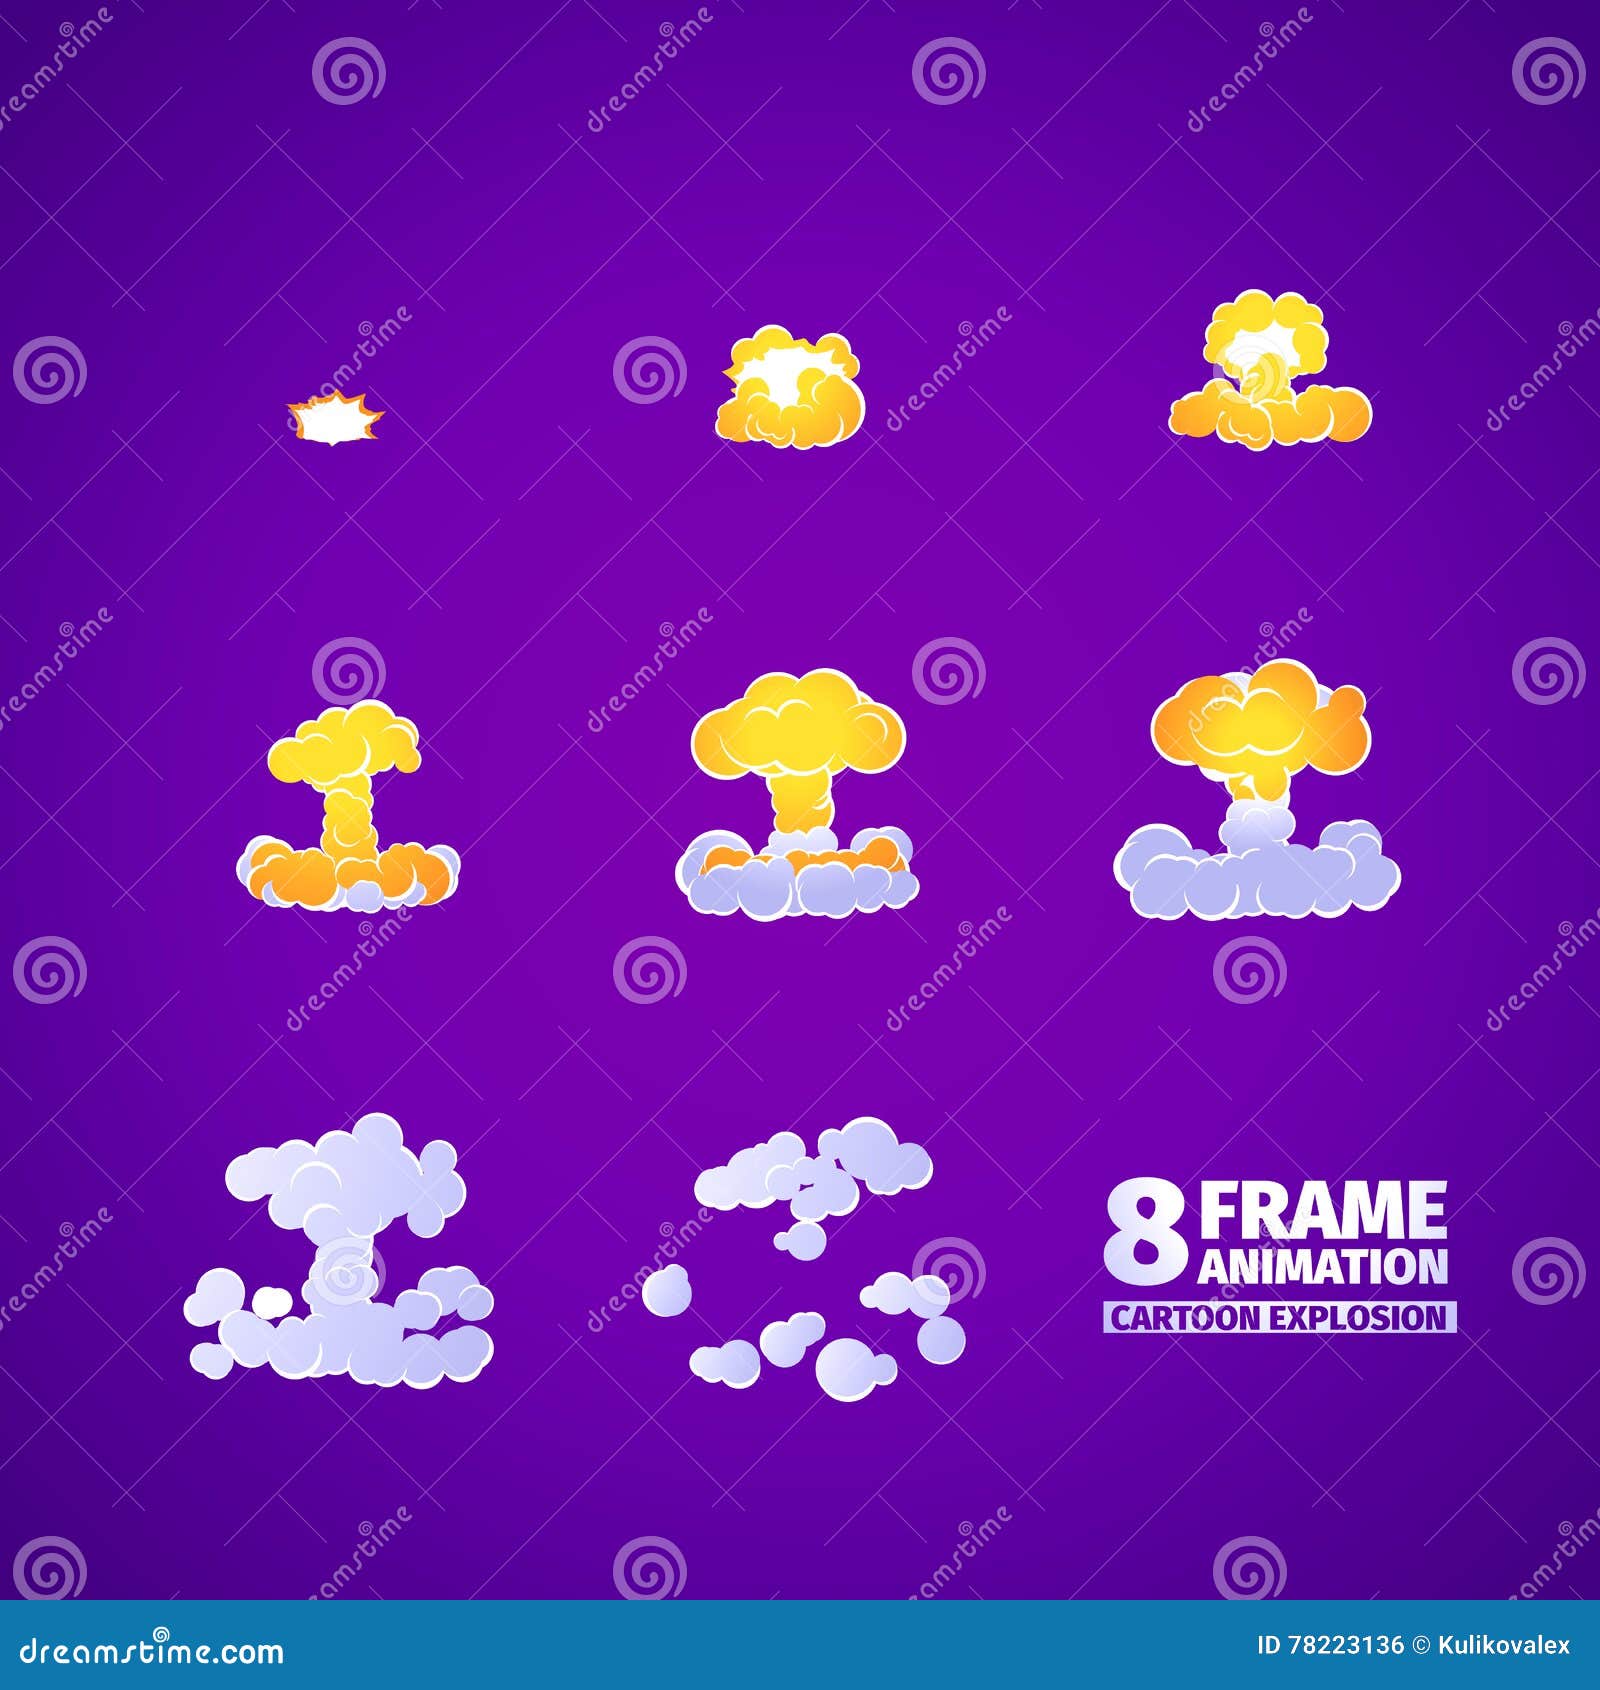 Explosion Cartoon Explosion Animation Frames For Game Sprite Sheet On